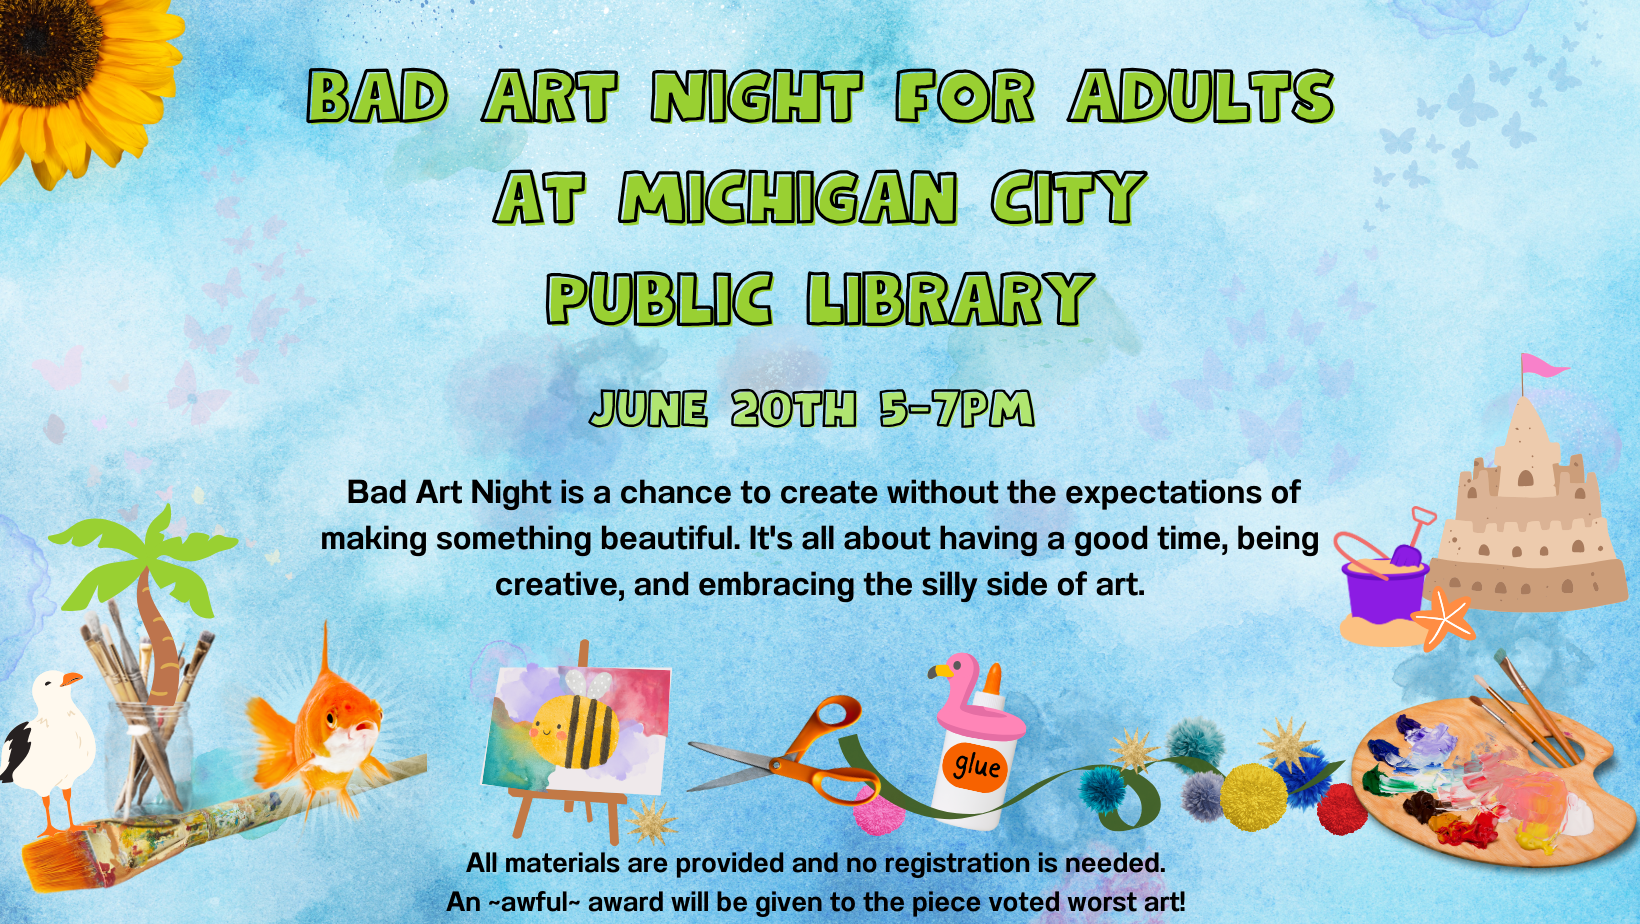 Bad Art Night for Adults, Thursday, June 20 at 5:00 pm